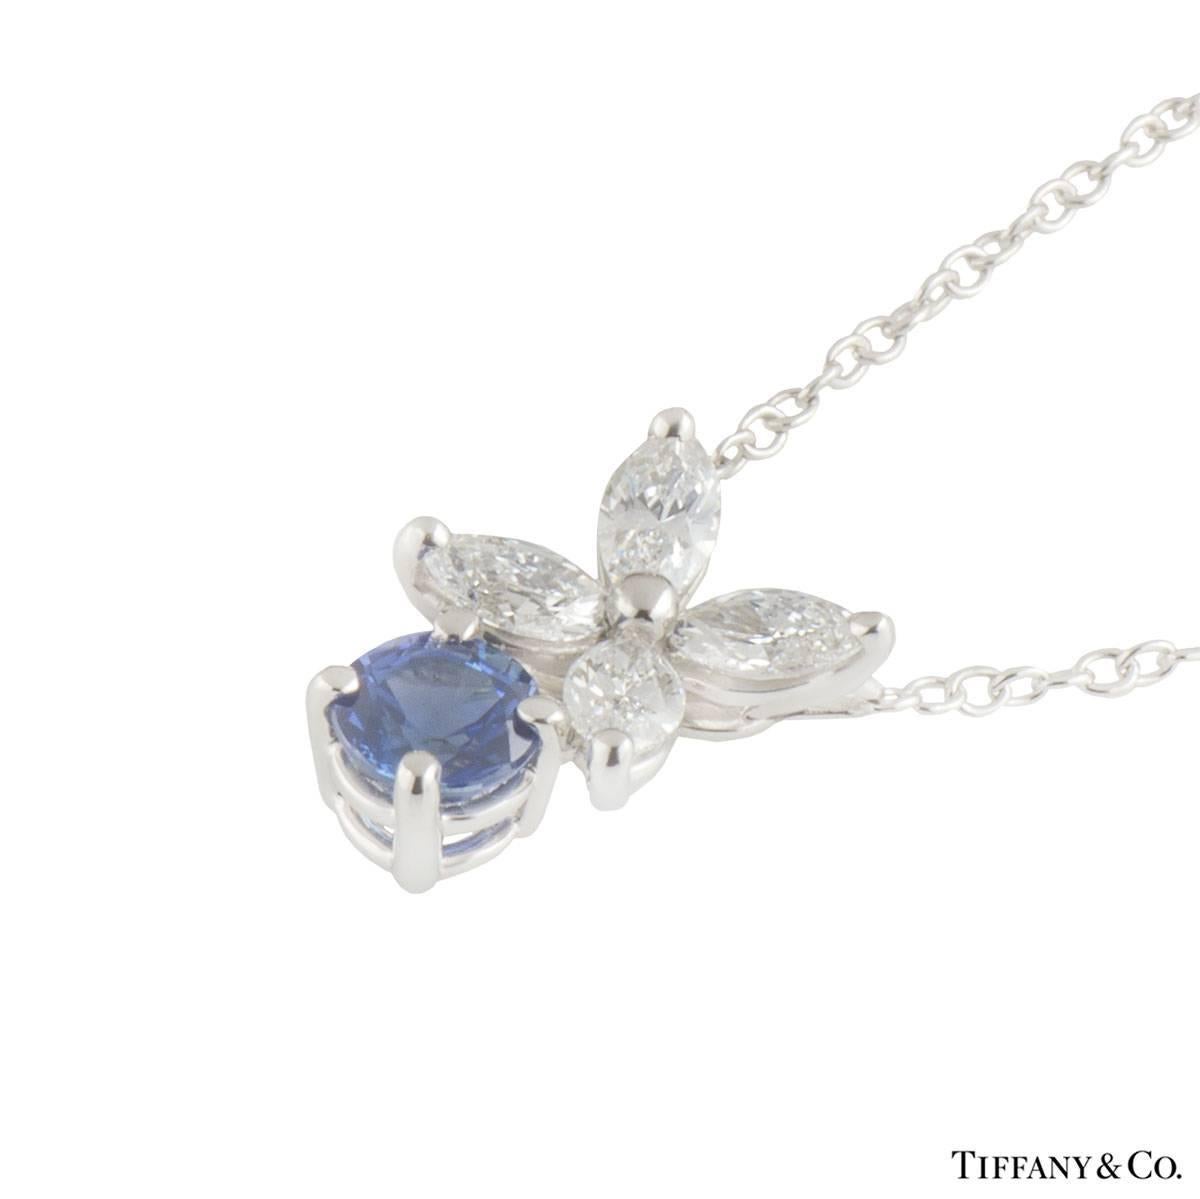 A platinum diamond and sapphire Tiffany & Co. necklace from the Victoria collection. The necklace comprises of 4 marquise cut diamonds in a clawed setting with a round brilliant cut sapphire placed at the bottom in a 4 claw setting. The diamonds